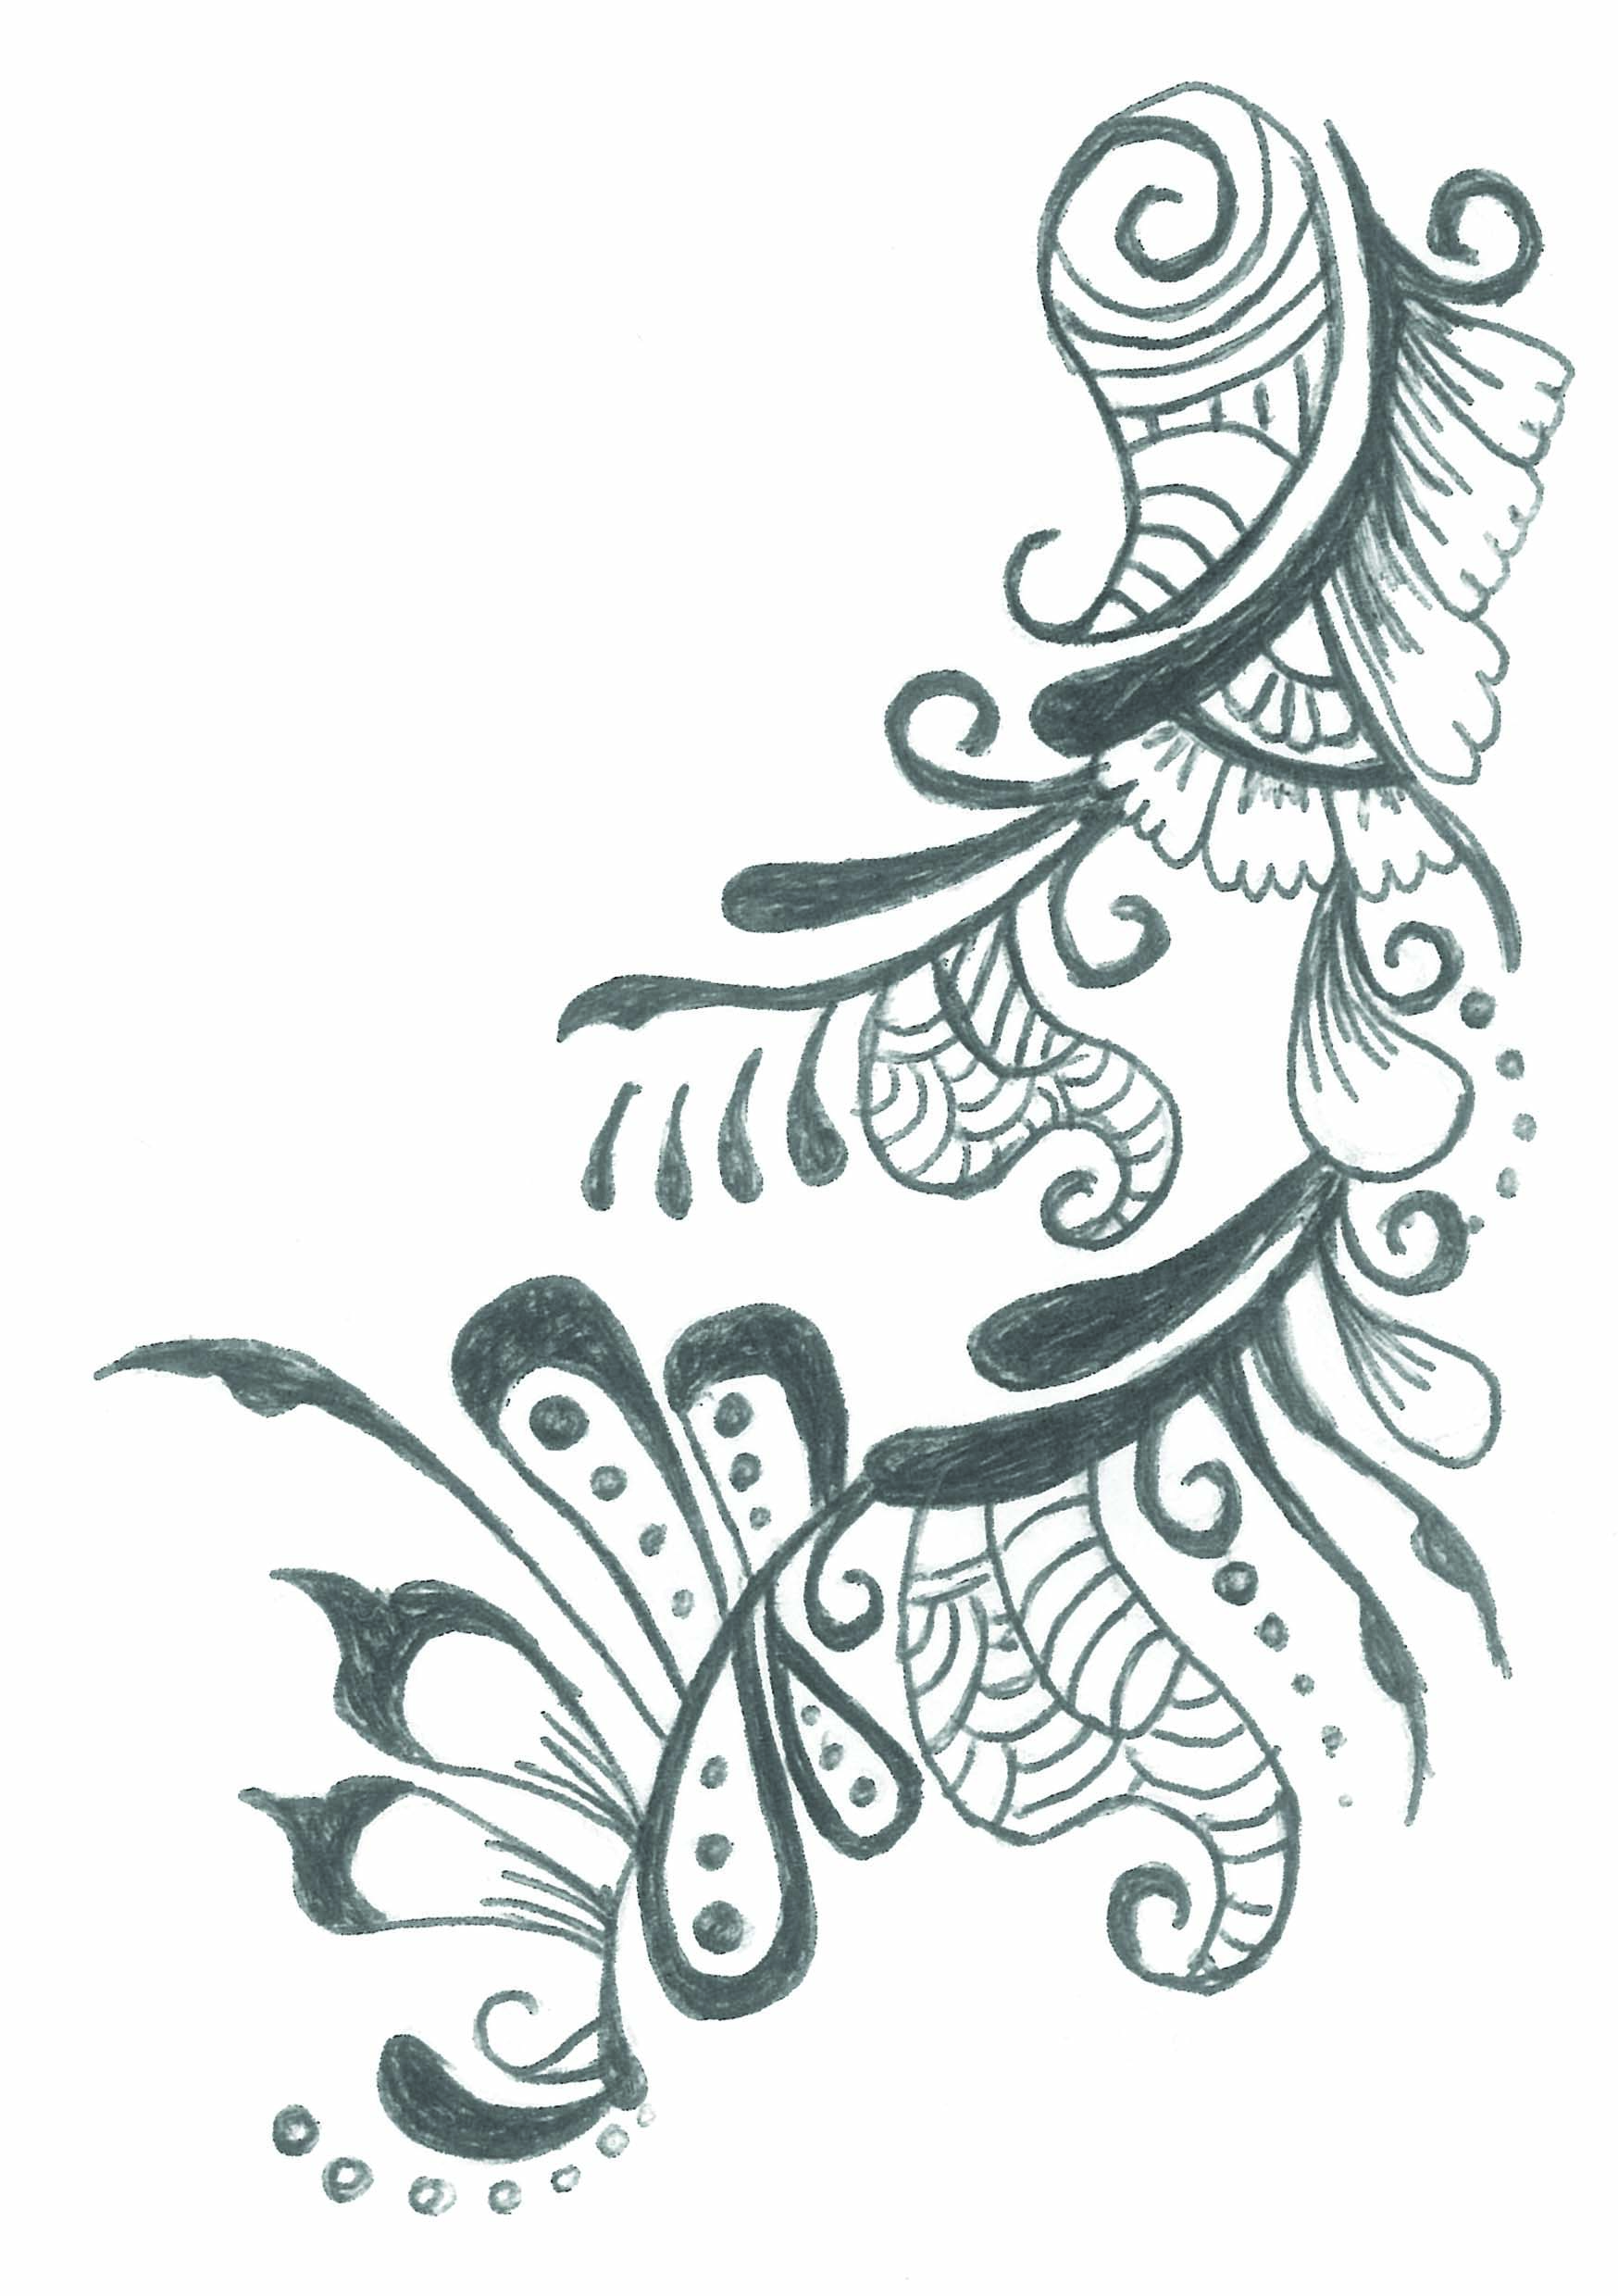 Free Designs To Draw, Download Free Designs To Draw png images, Free